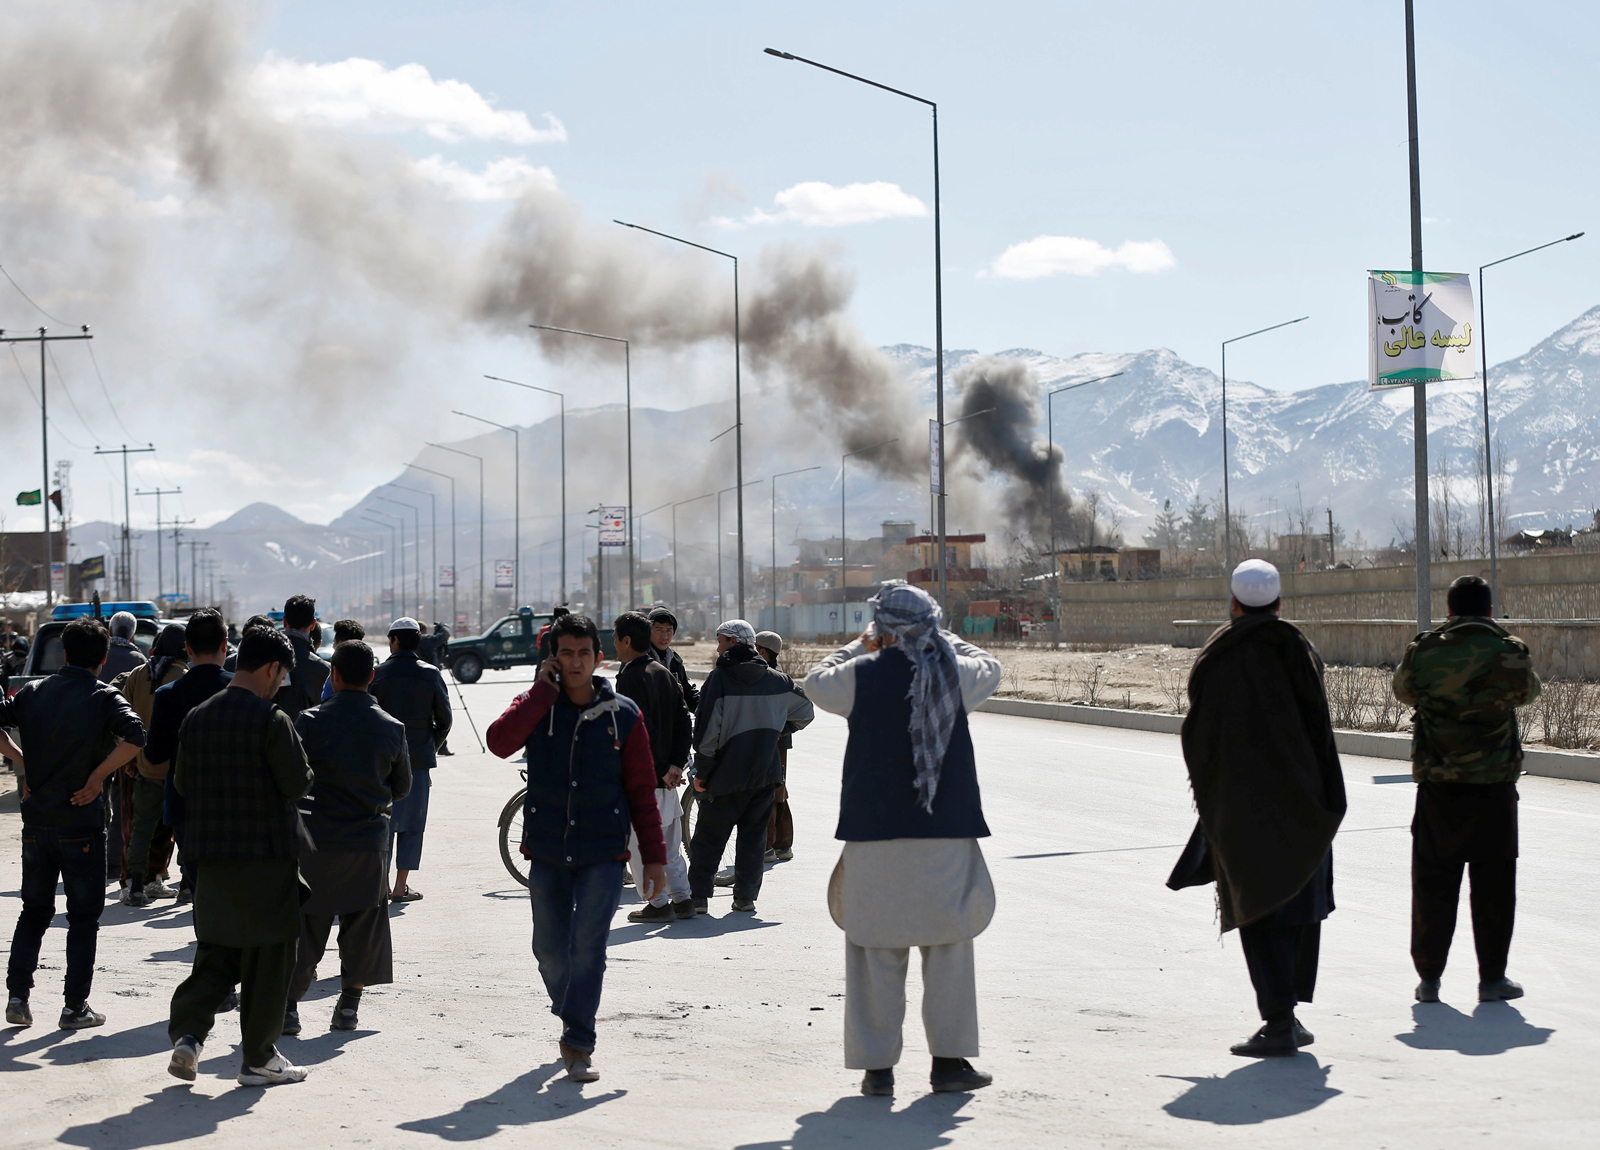 Smoke from a battle between Taliban and Afghan forces, Kabul, Afghanistan, March 1, 2017
